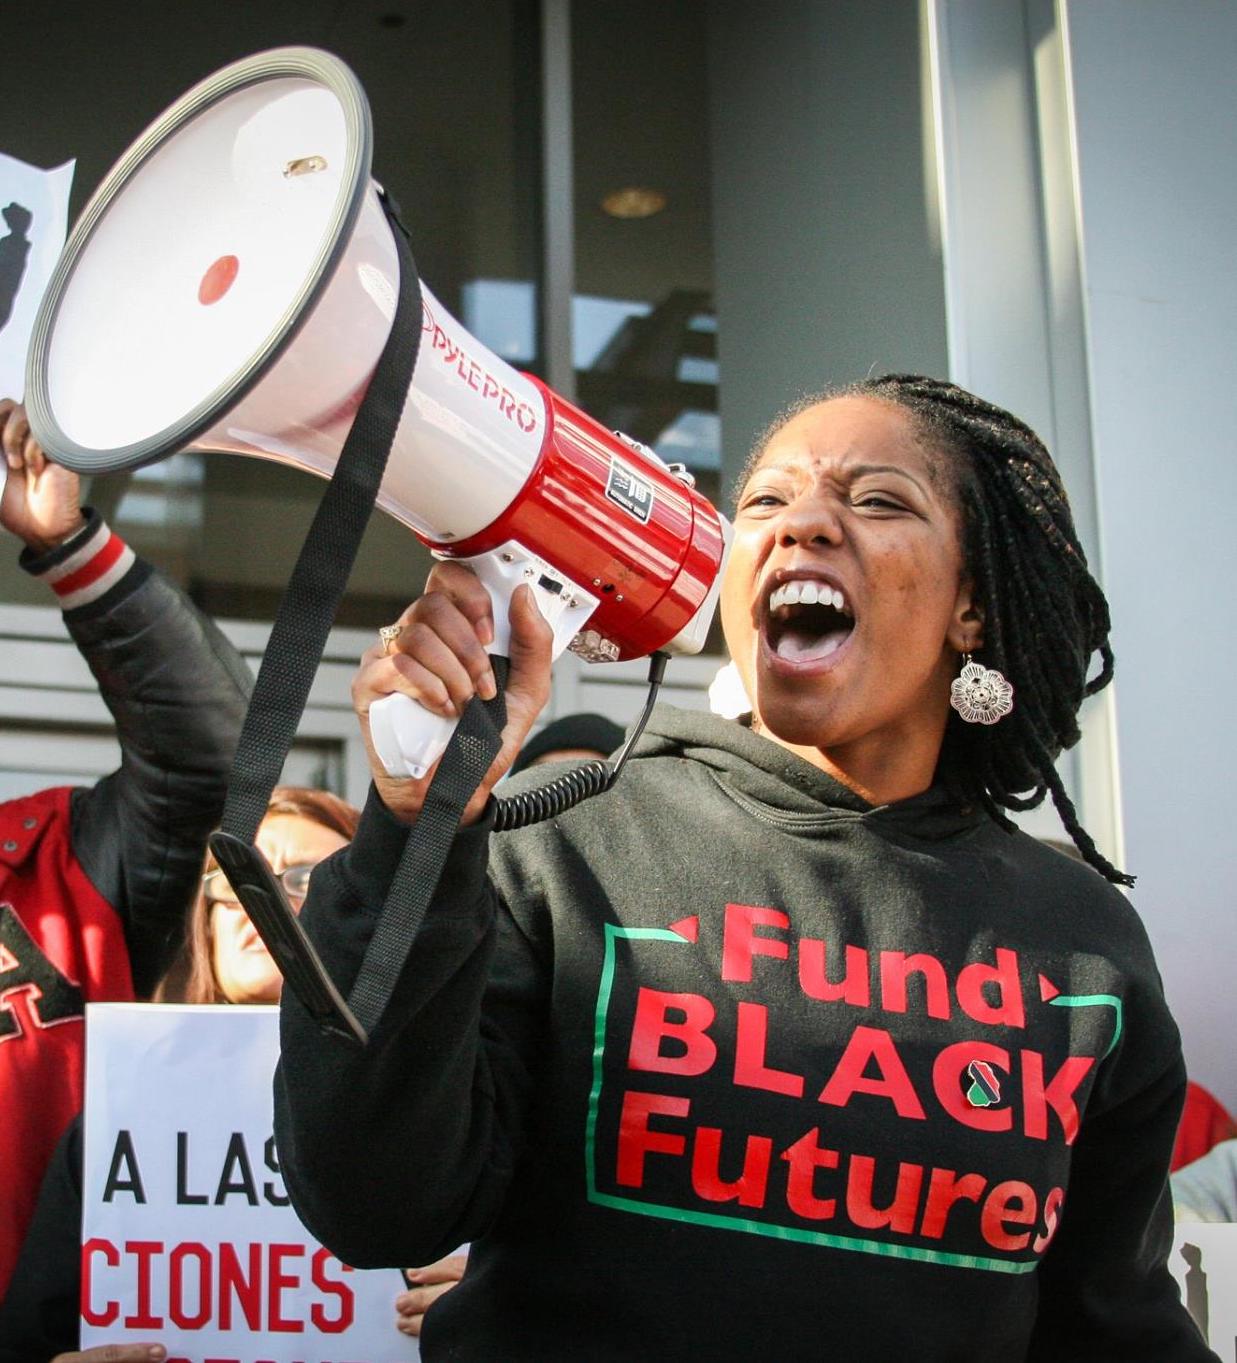 A+still+from+%E2%80%9CUnapologetic%E2%80%9D+of+Janae+at+a+protest%2C+speaking+into+a+megaphone.+She+is+wearing+a+t-shirt+that+reads+Fund+Black+Futures.